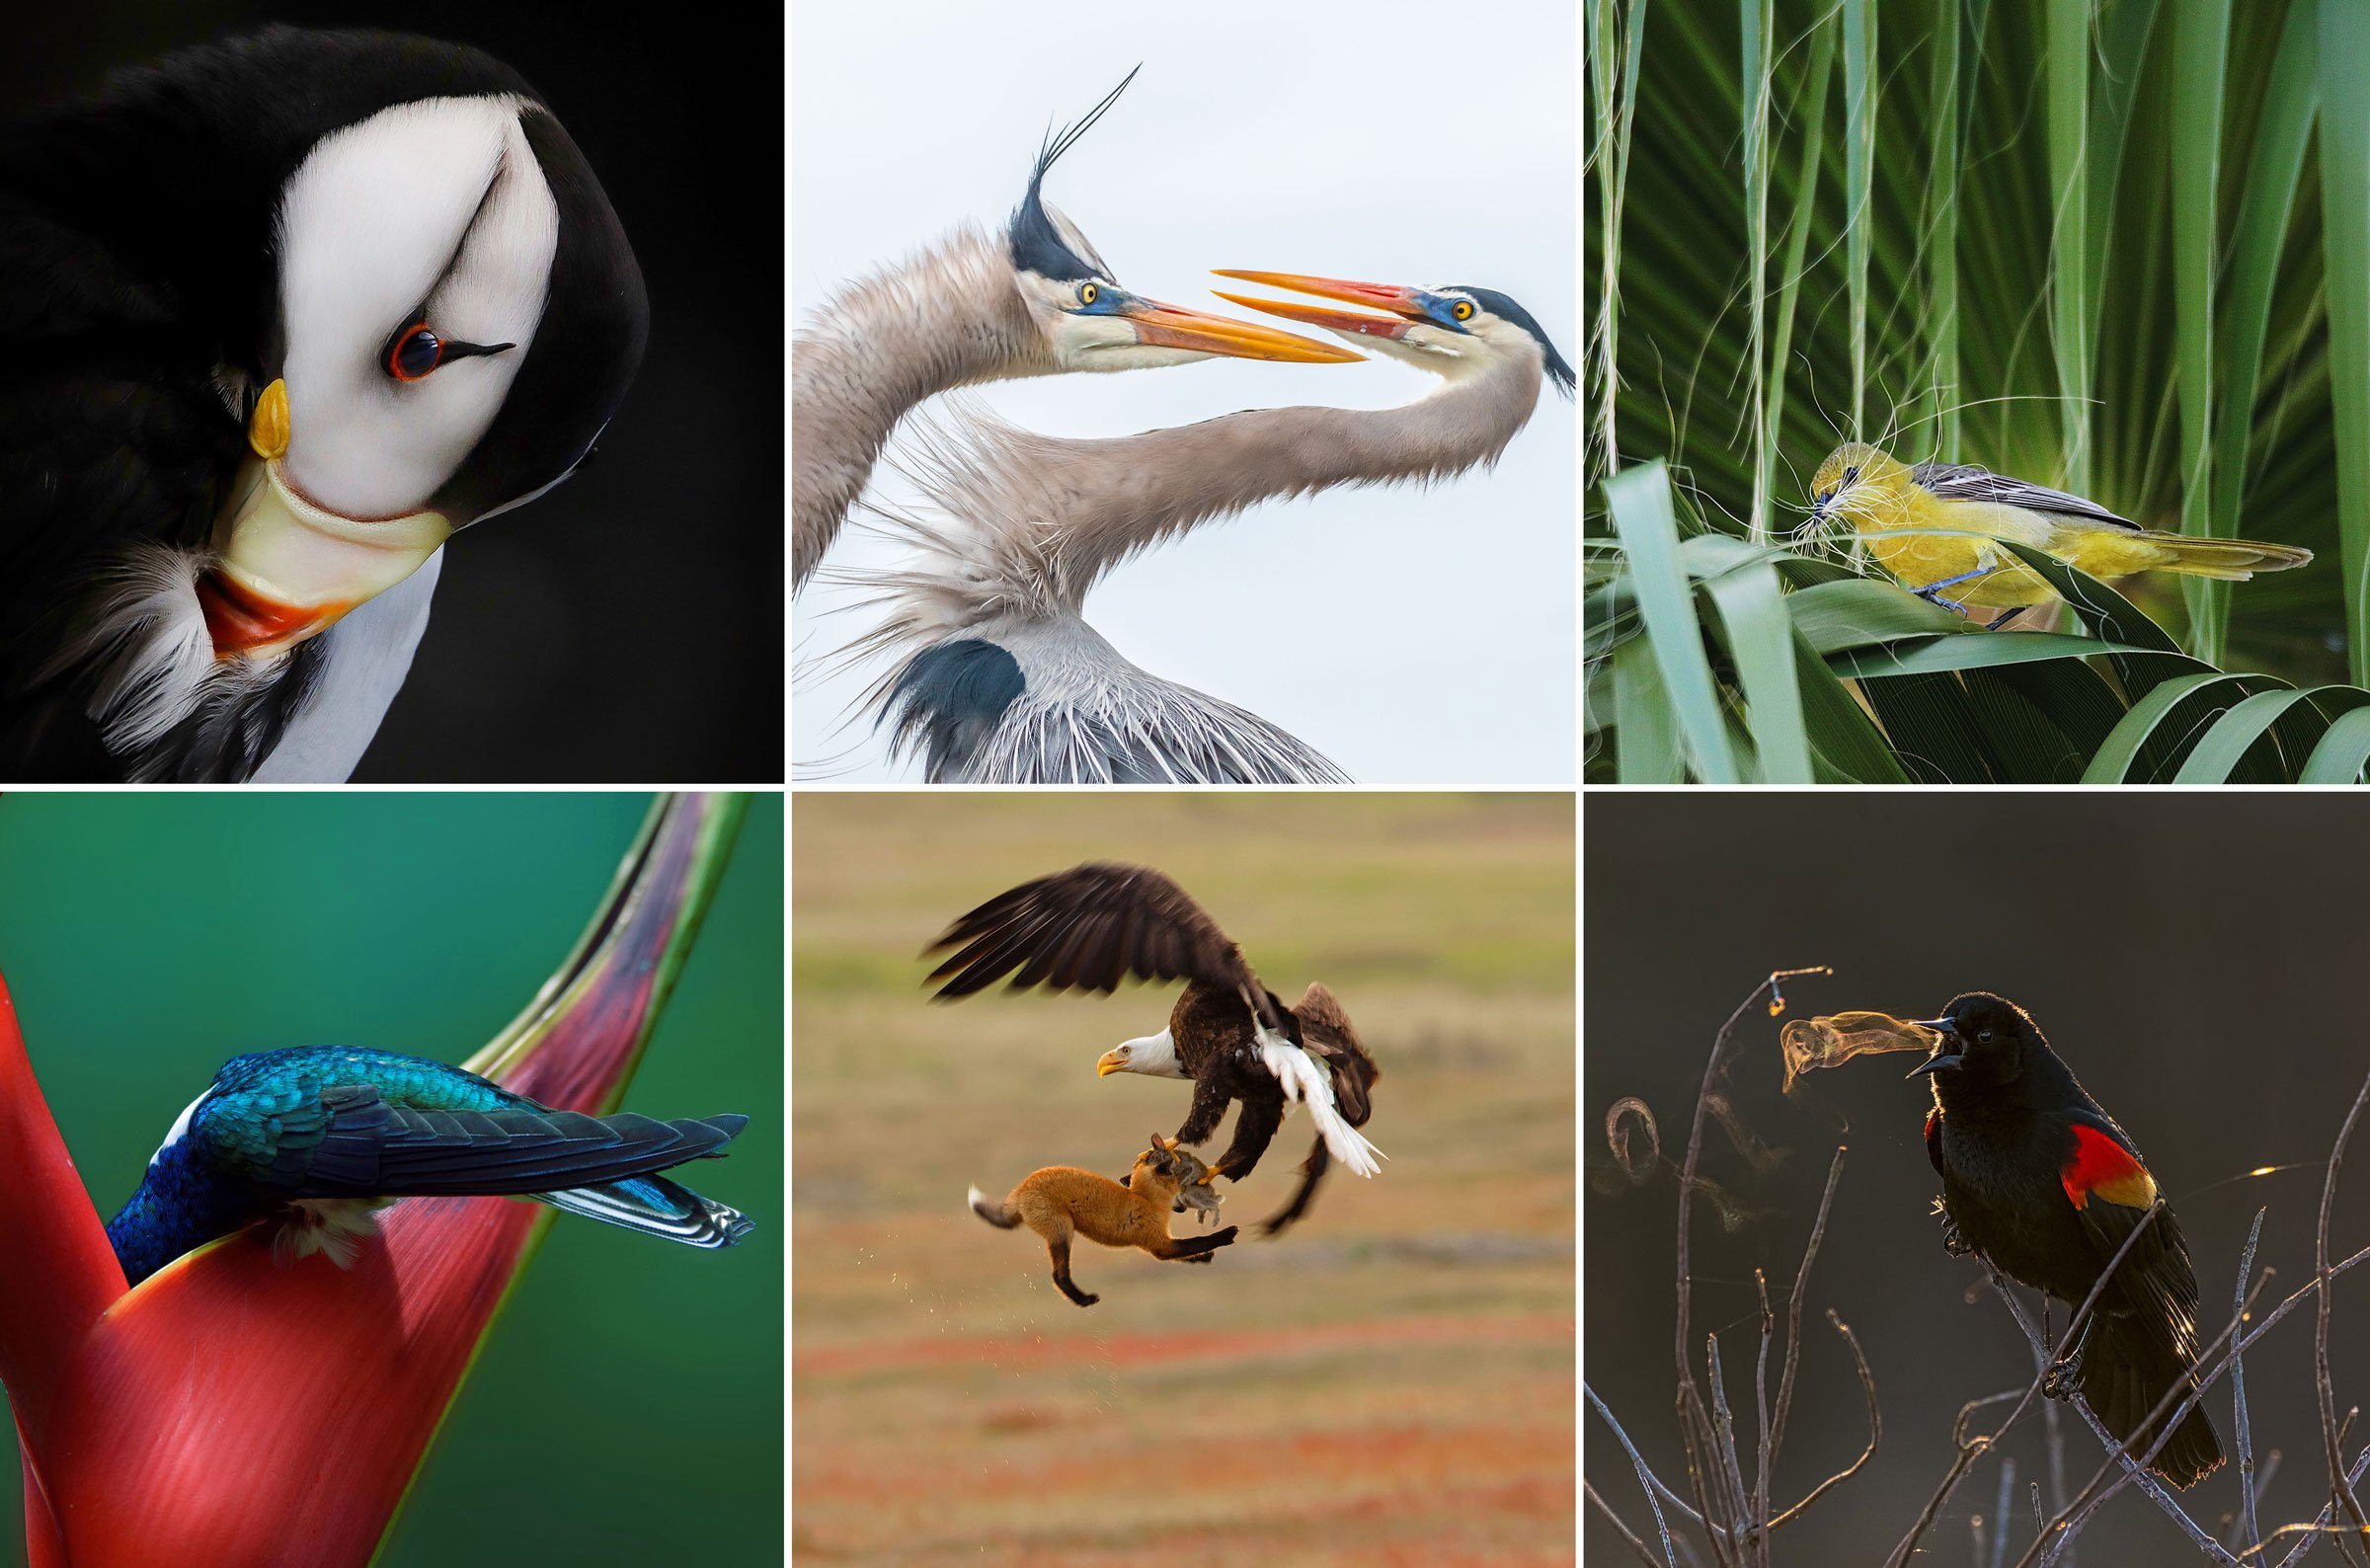 Winners of the 10th Annual Audubon Photography Awards Revealed